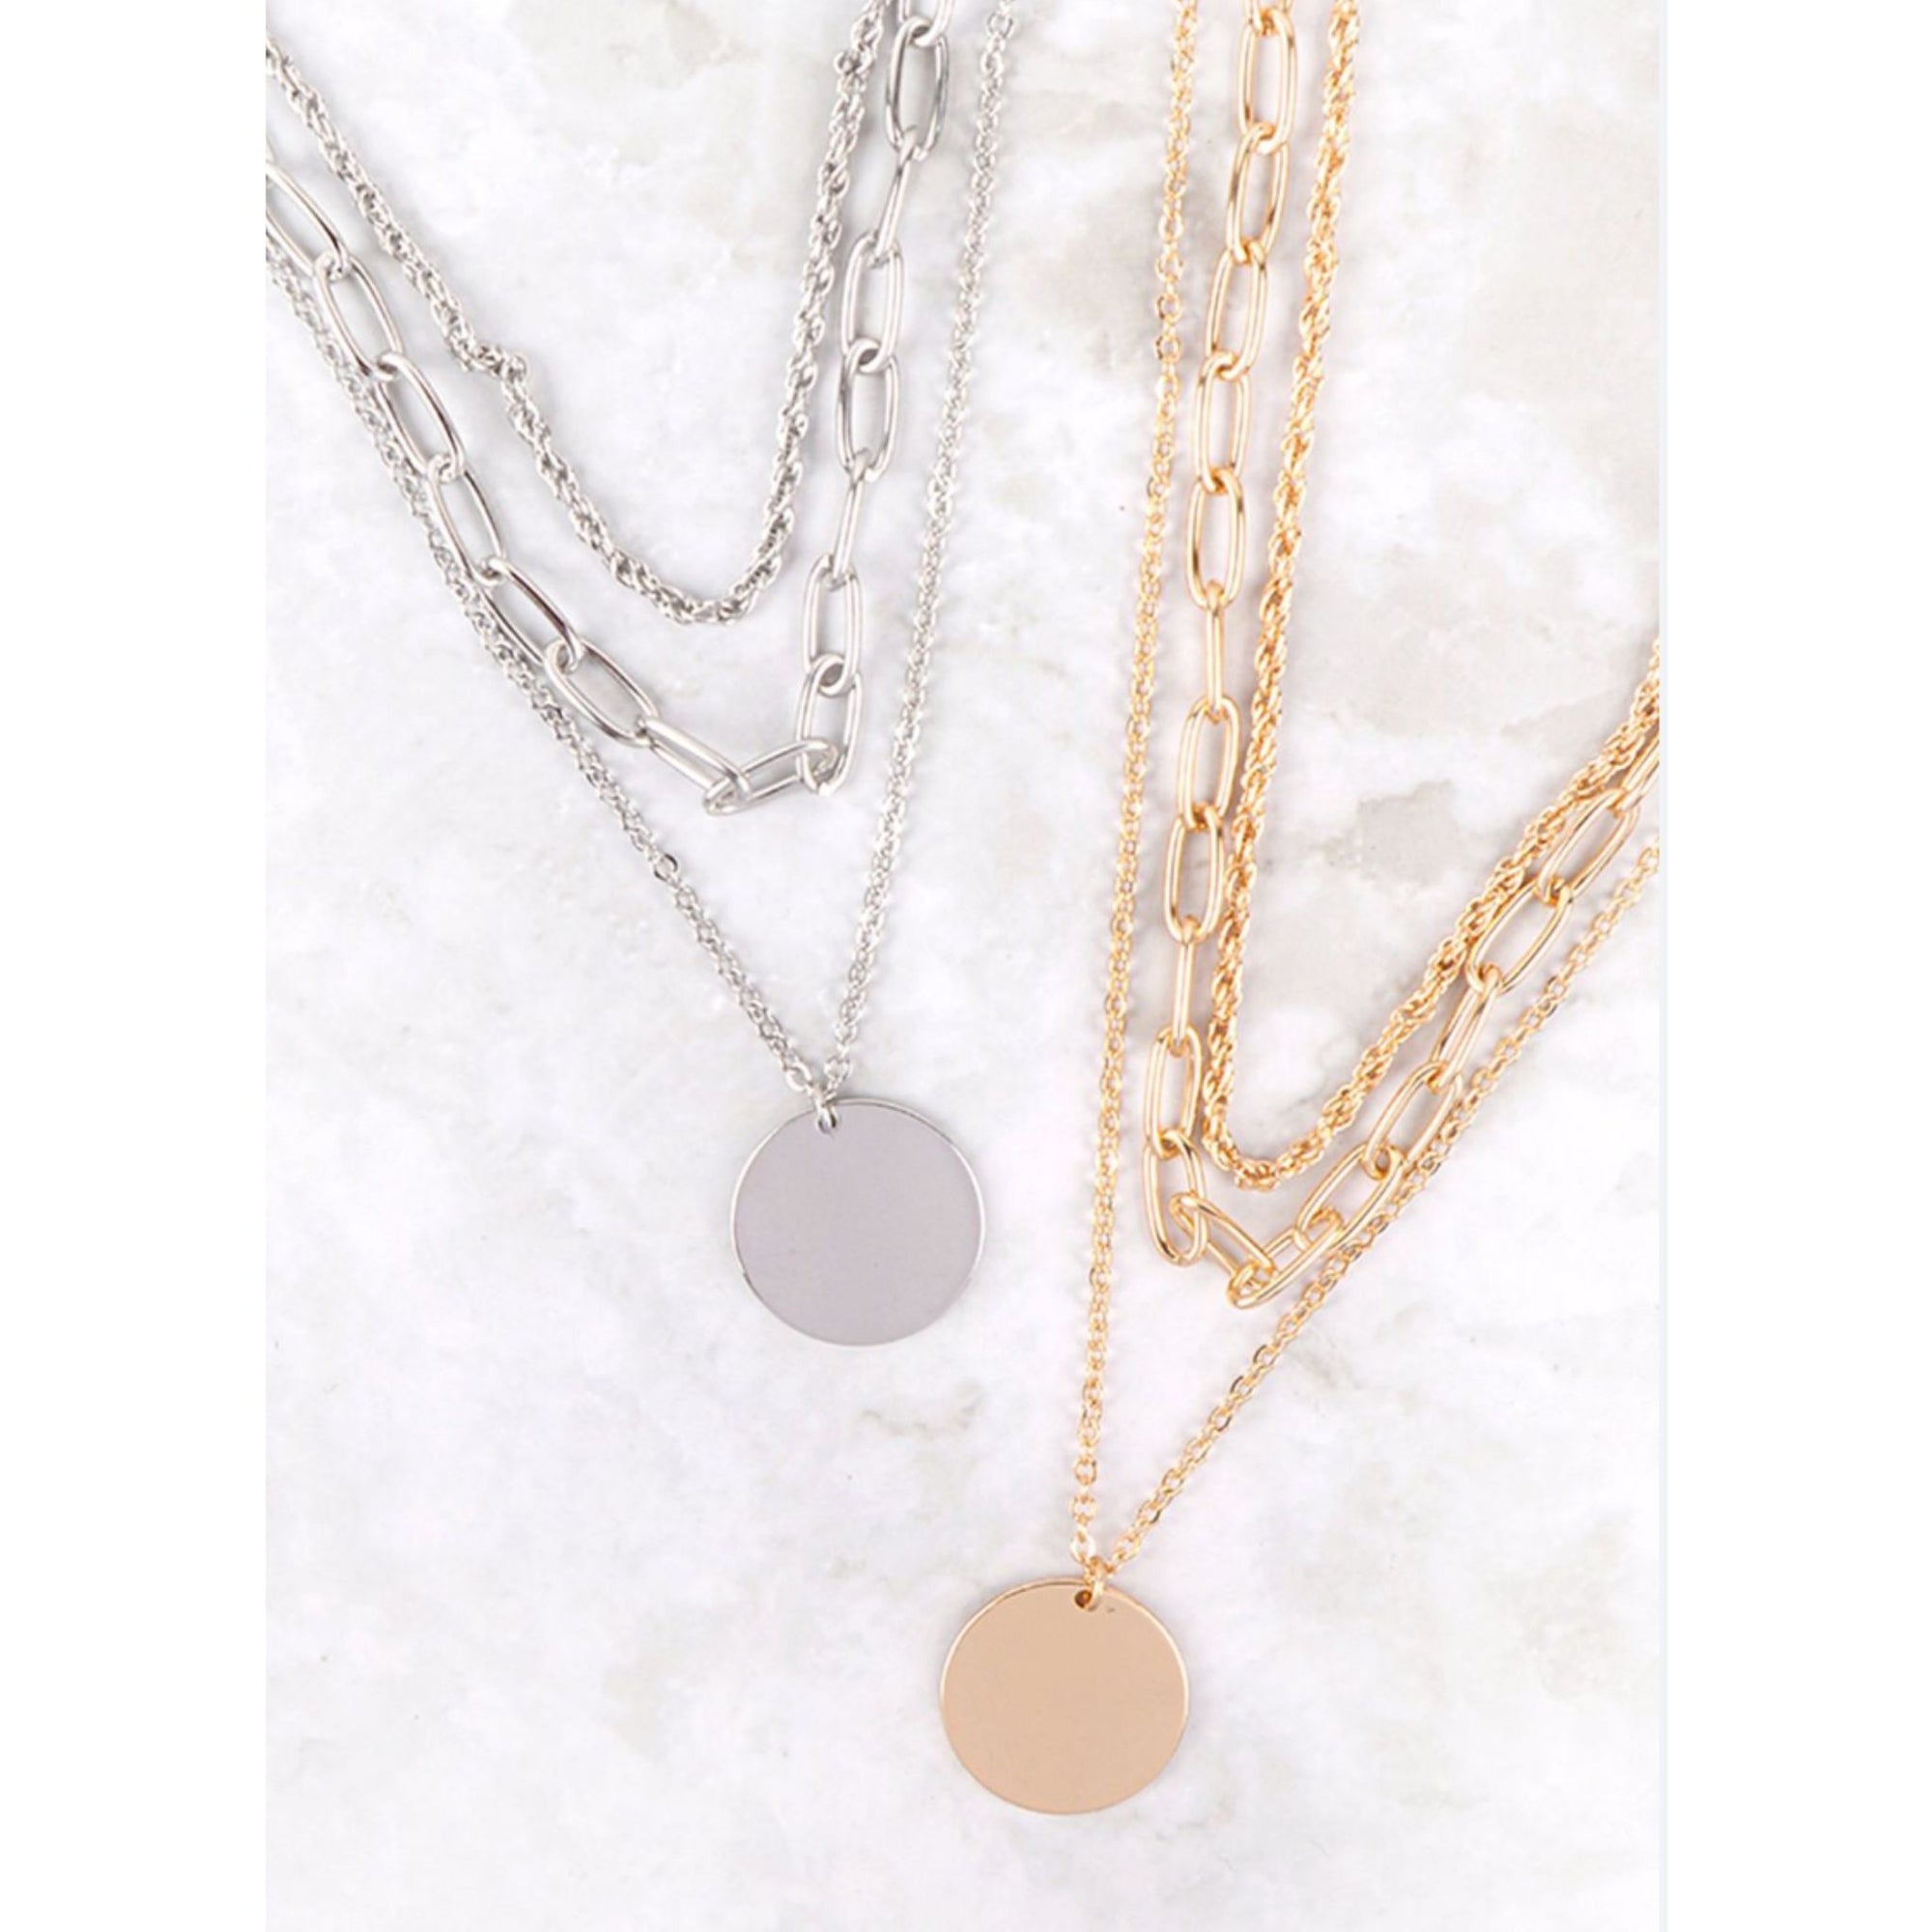 In It Together Layered Necklace